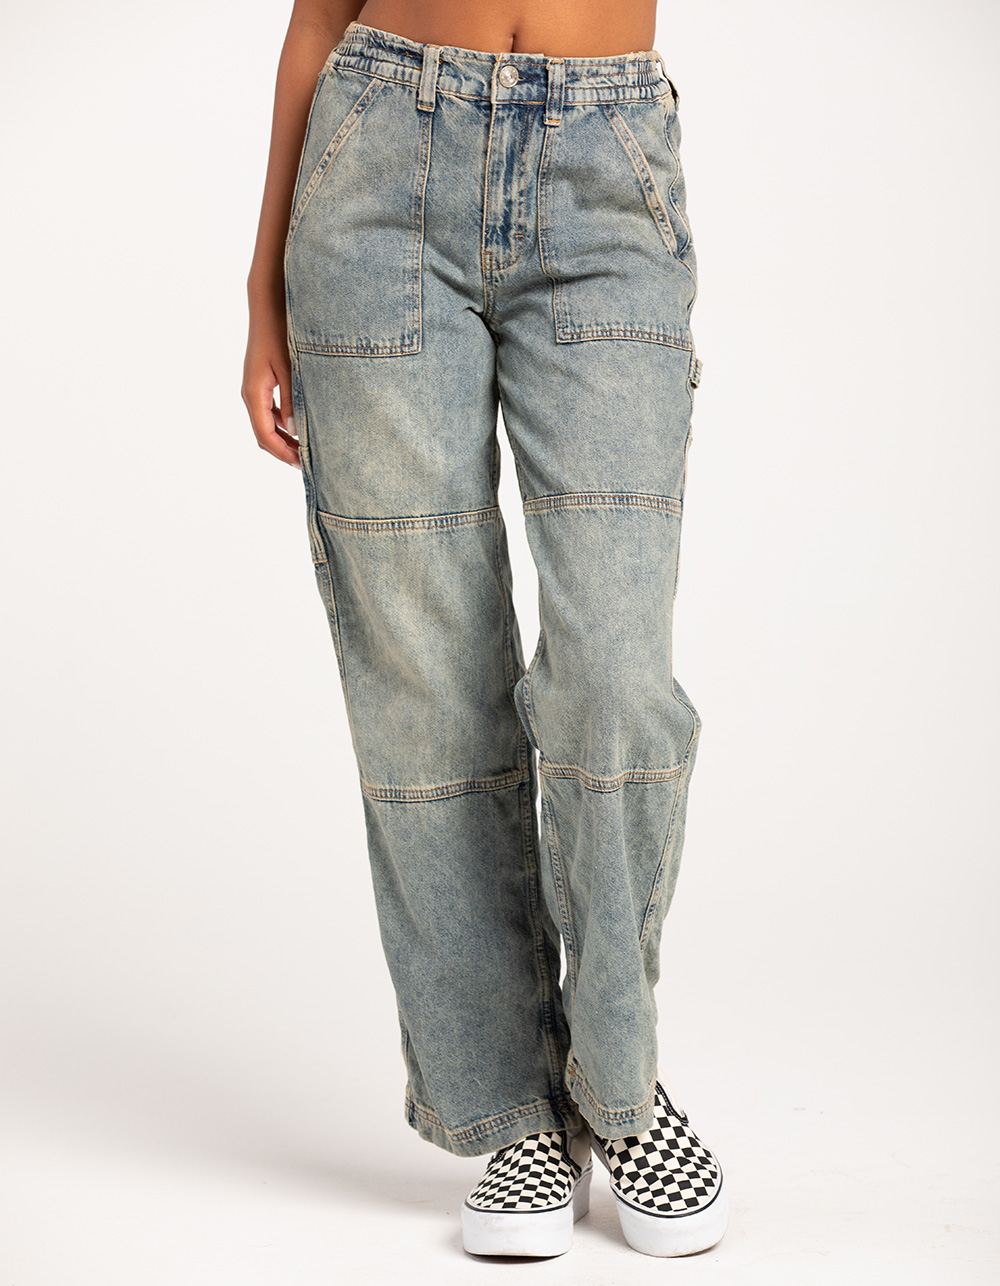 BDG Urban Outfitters Utility Skate Womens Jeans